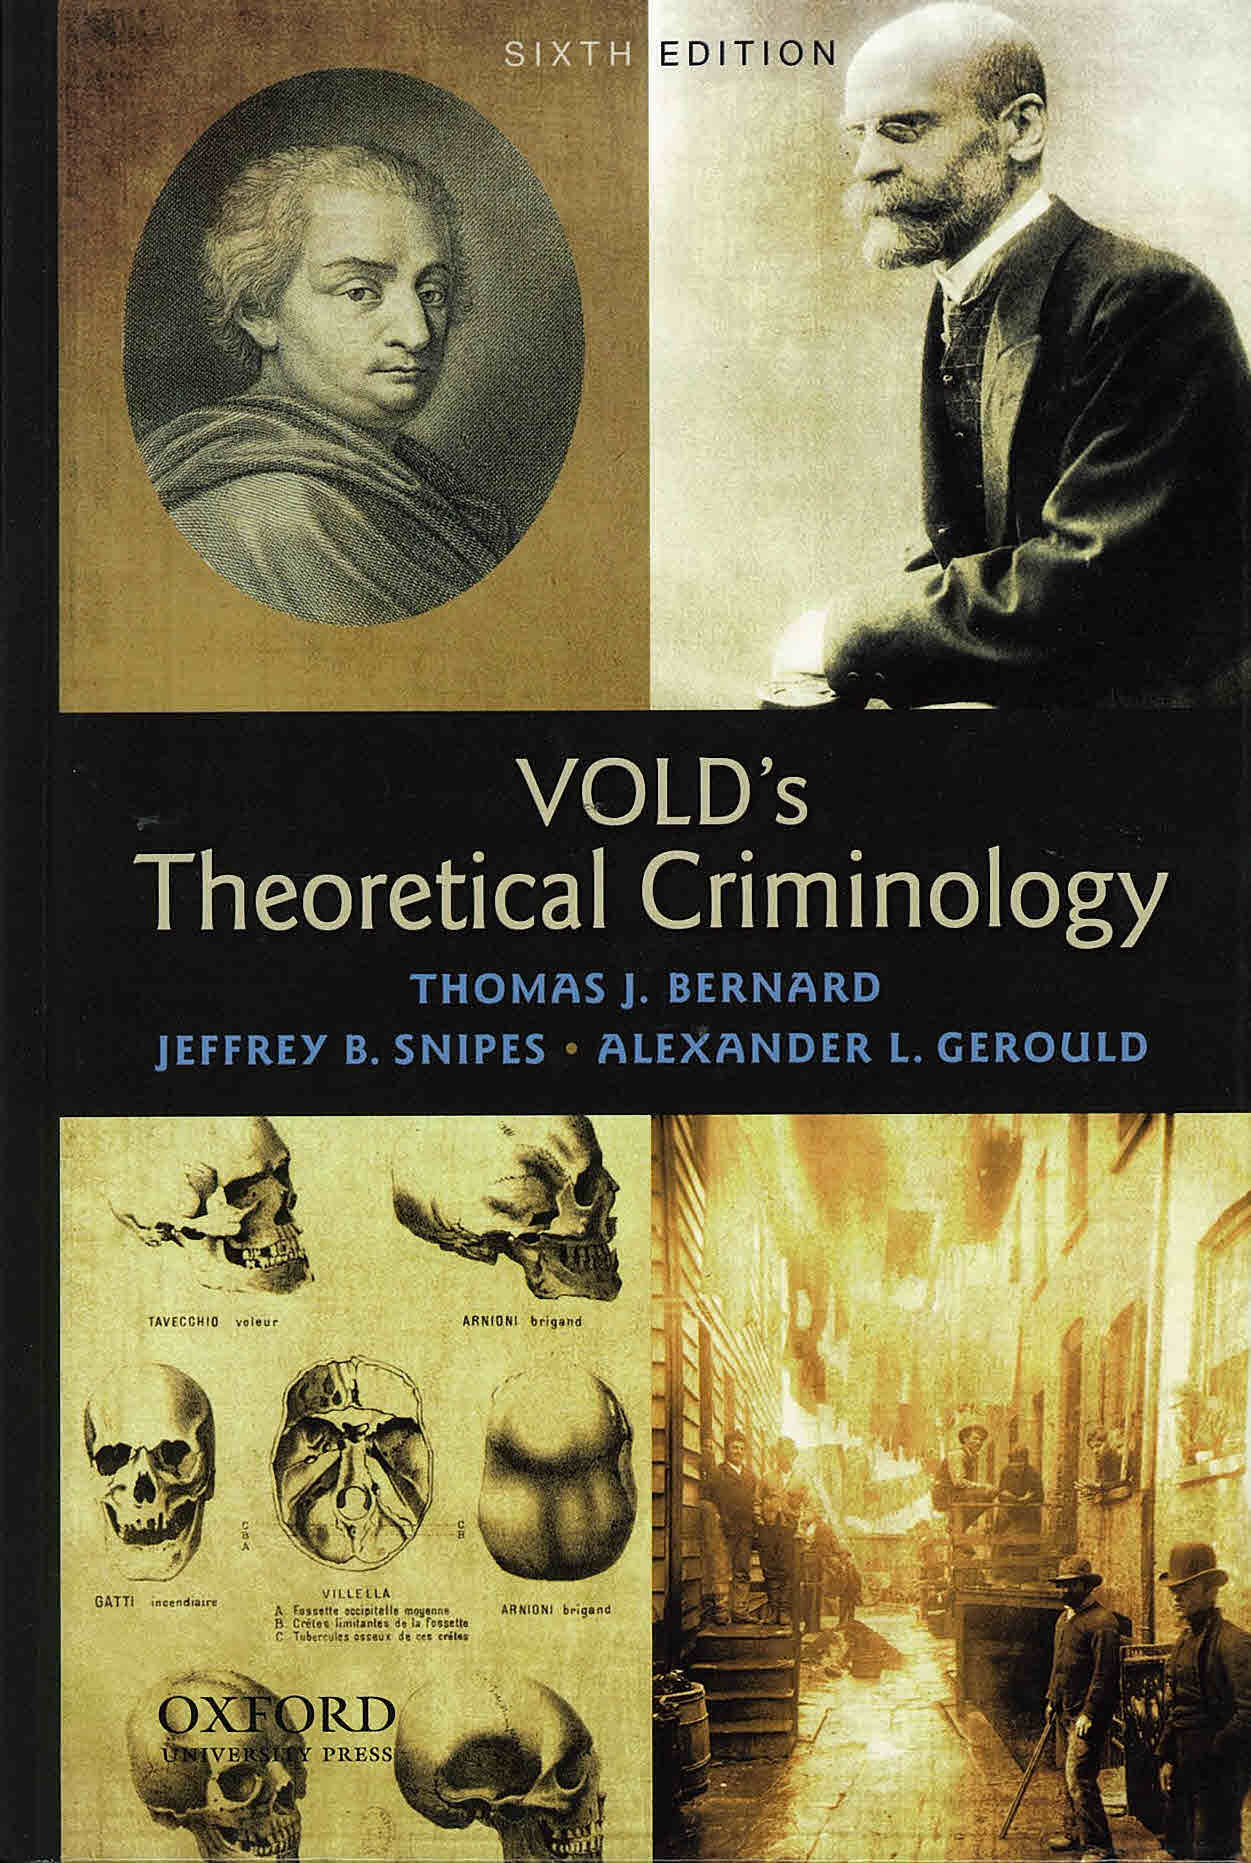 Vold's theorical criminology